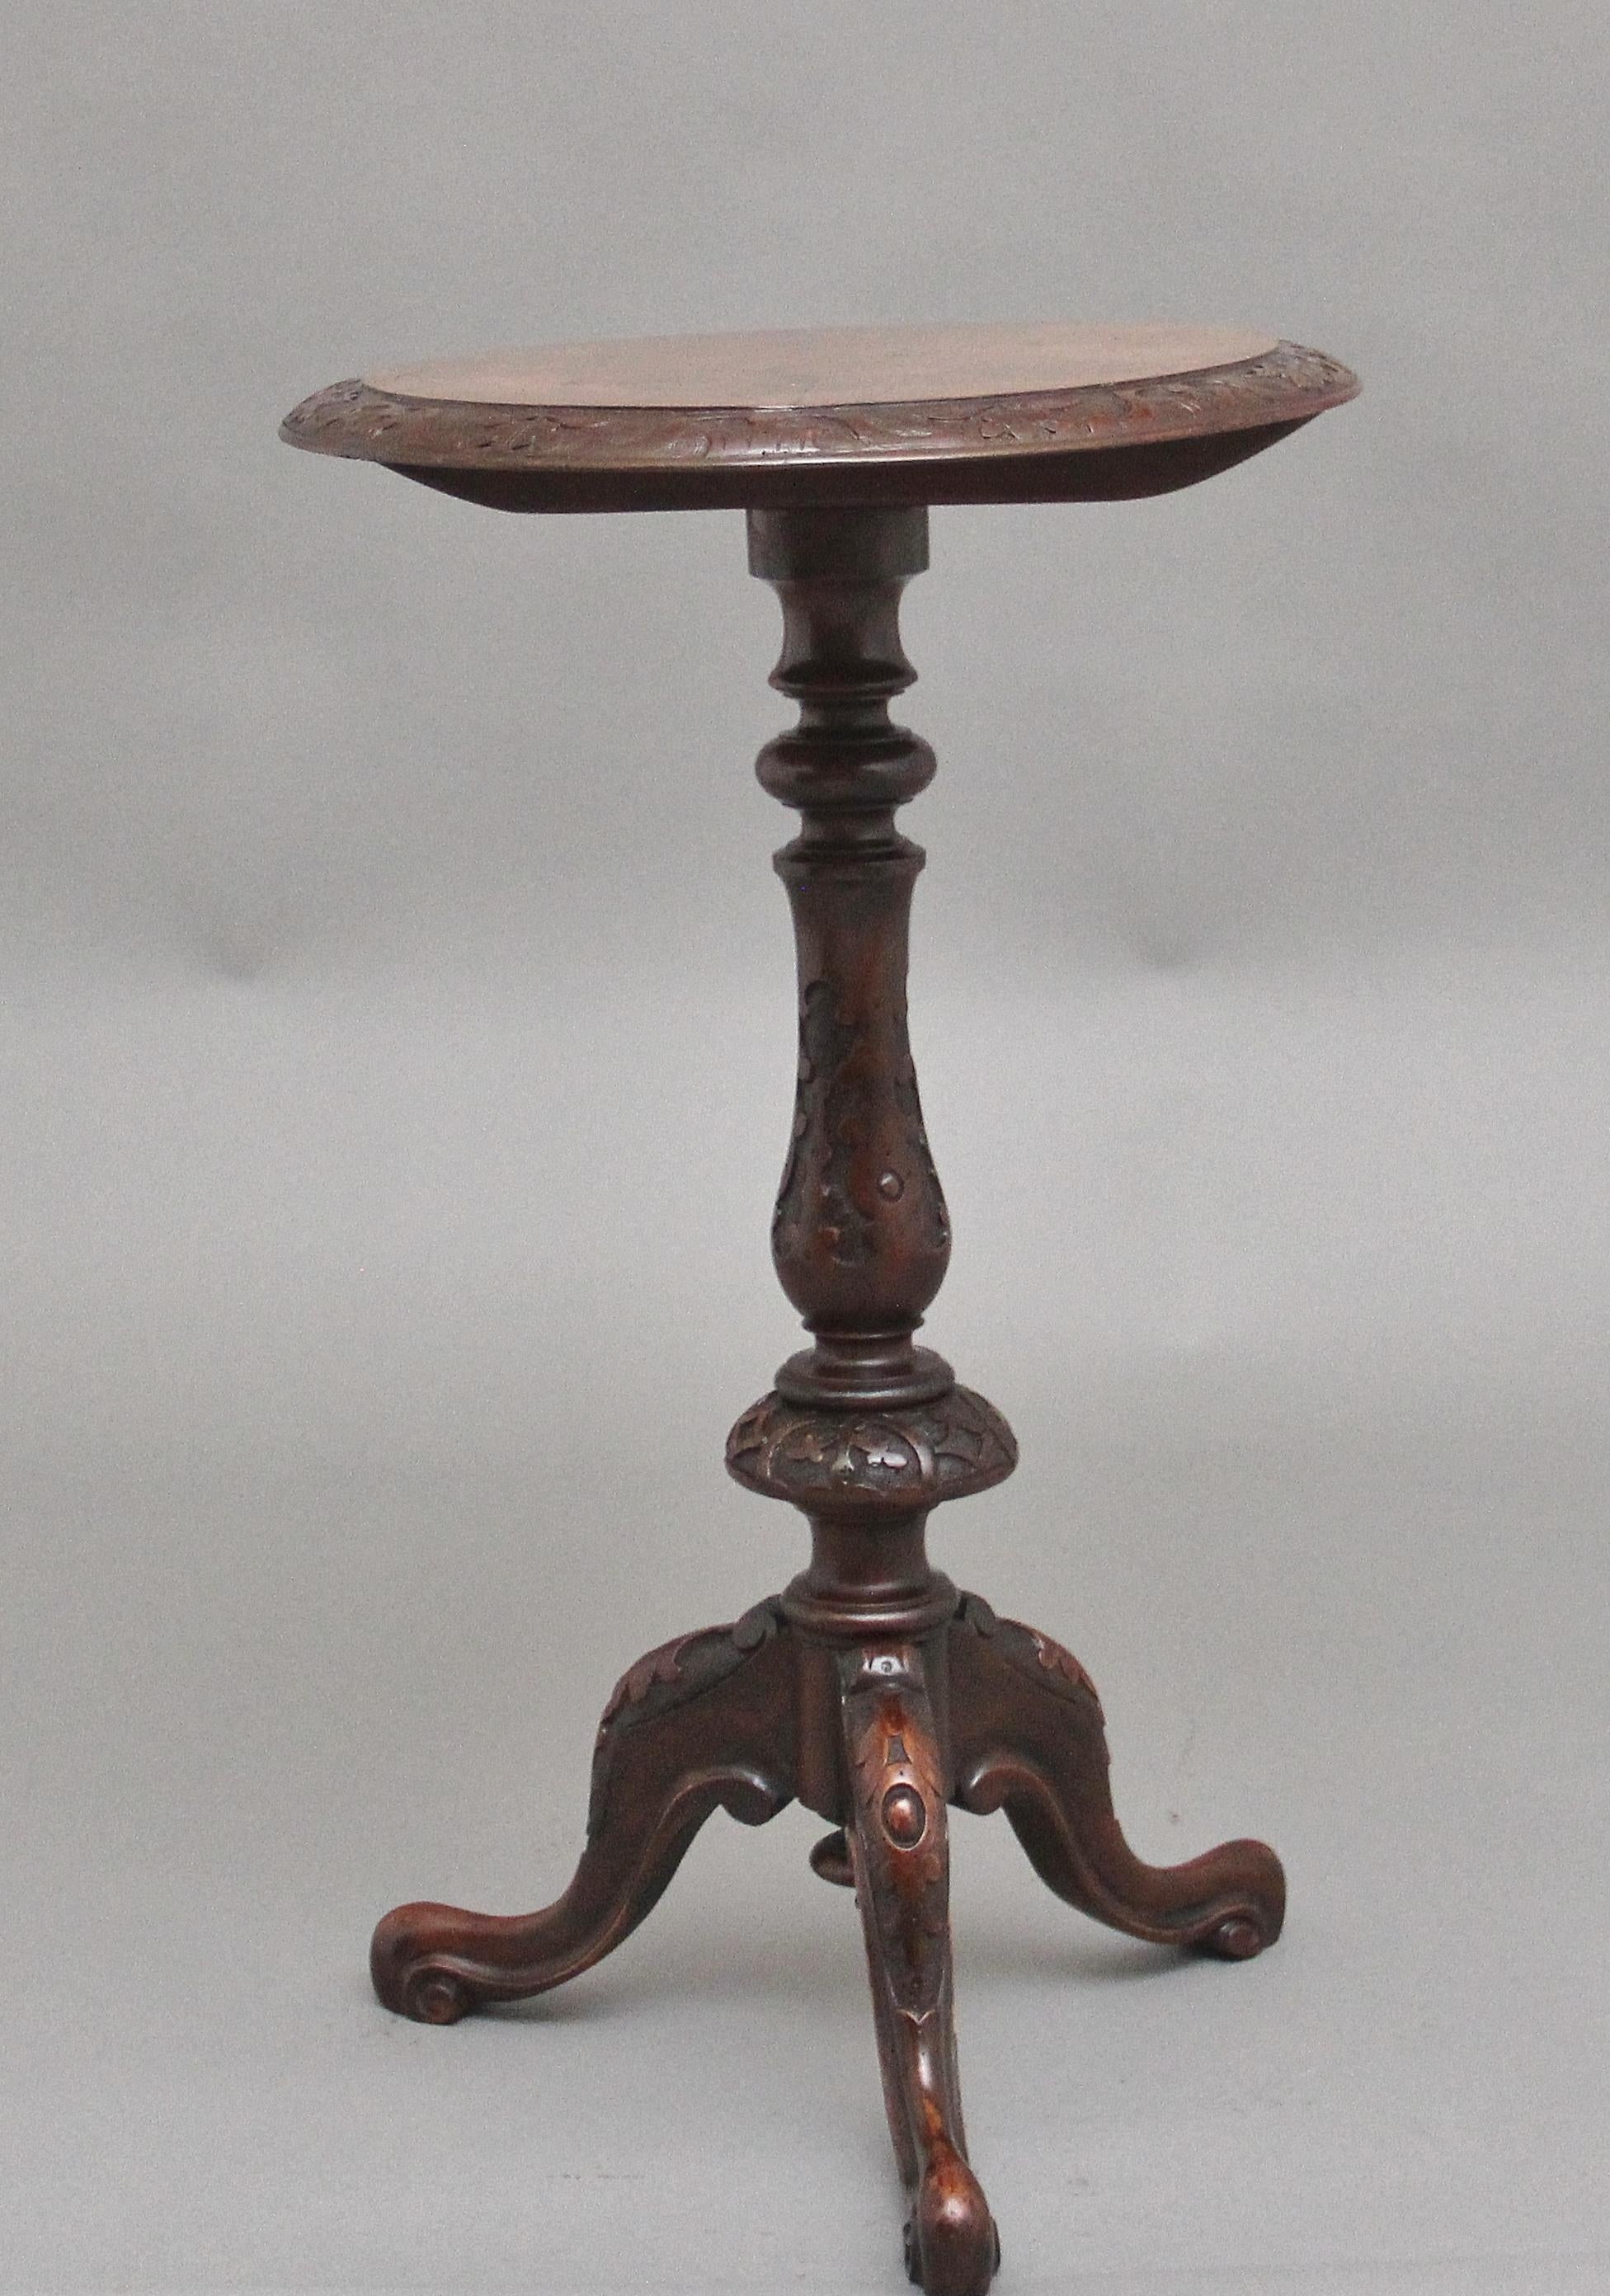 19th Century walnut wine / occasional table, having a wonderful figured oval top with a decorative floral carved edge raised on an intricate carved column with a turned finial at the bottom, supported on three carved cabriole legs terminating on